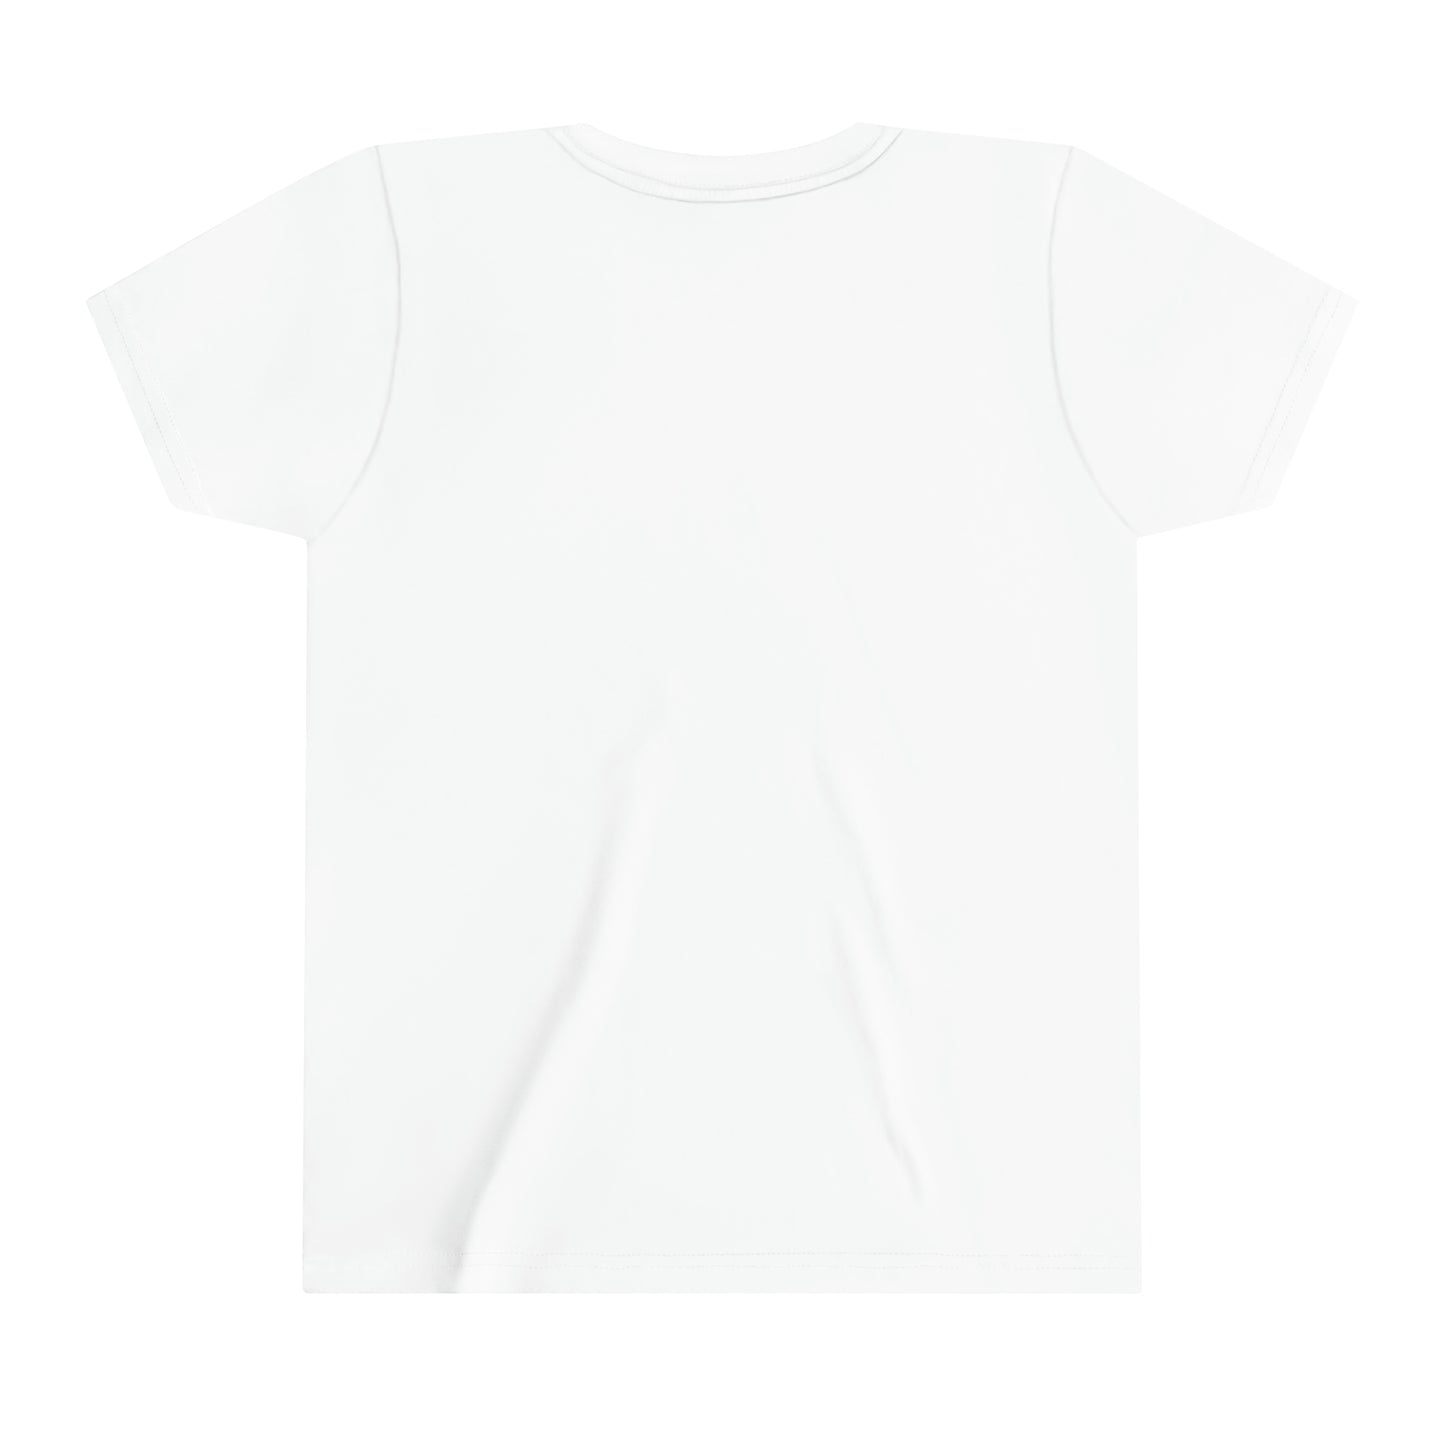 Be Amazing Hands Youth Short Sleeve Tee